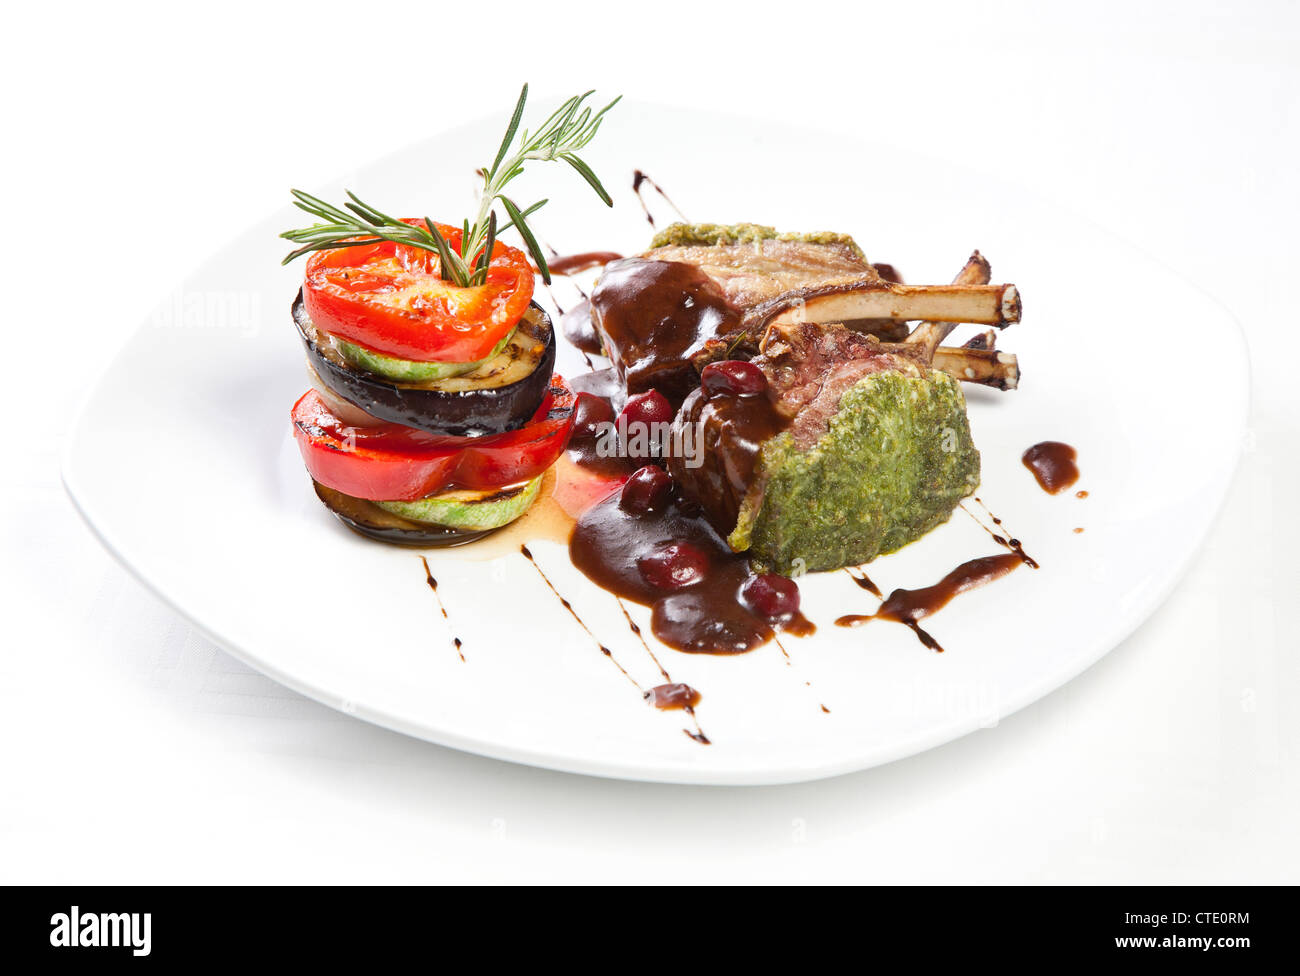 Roast meet with grilled vegetables Stock Photo